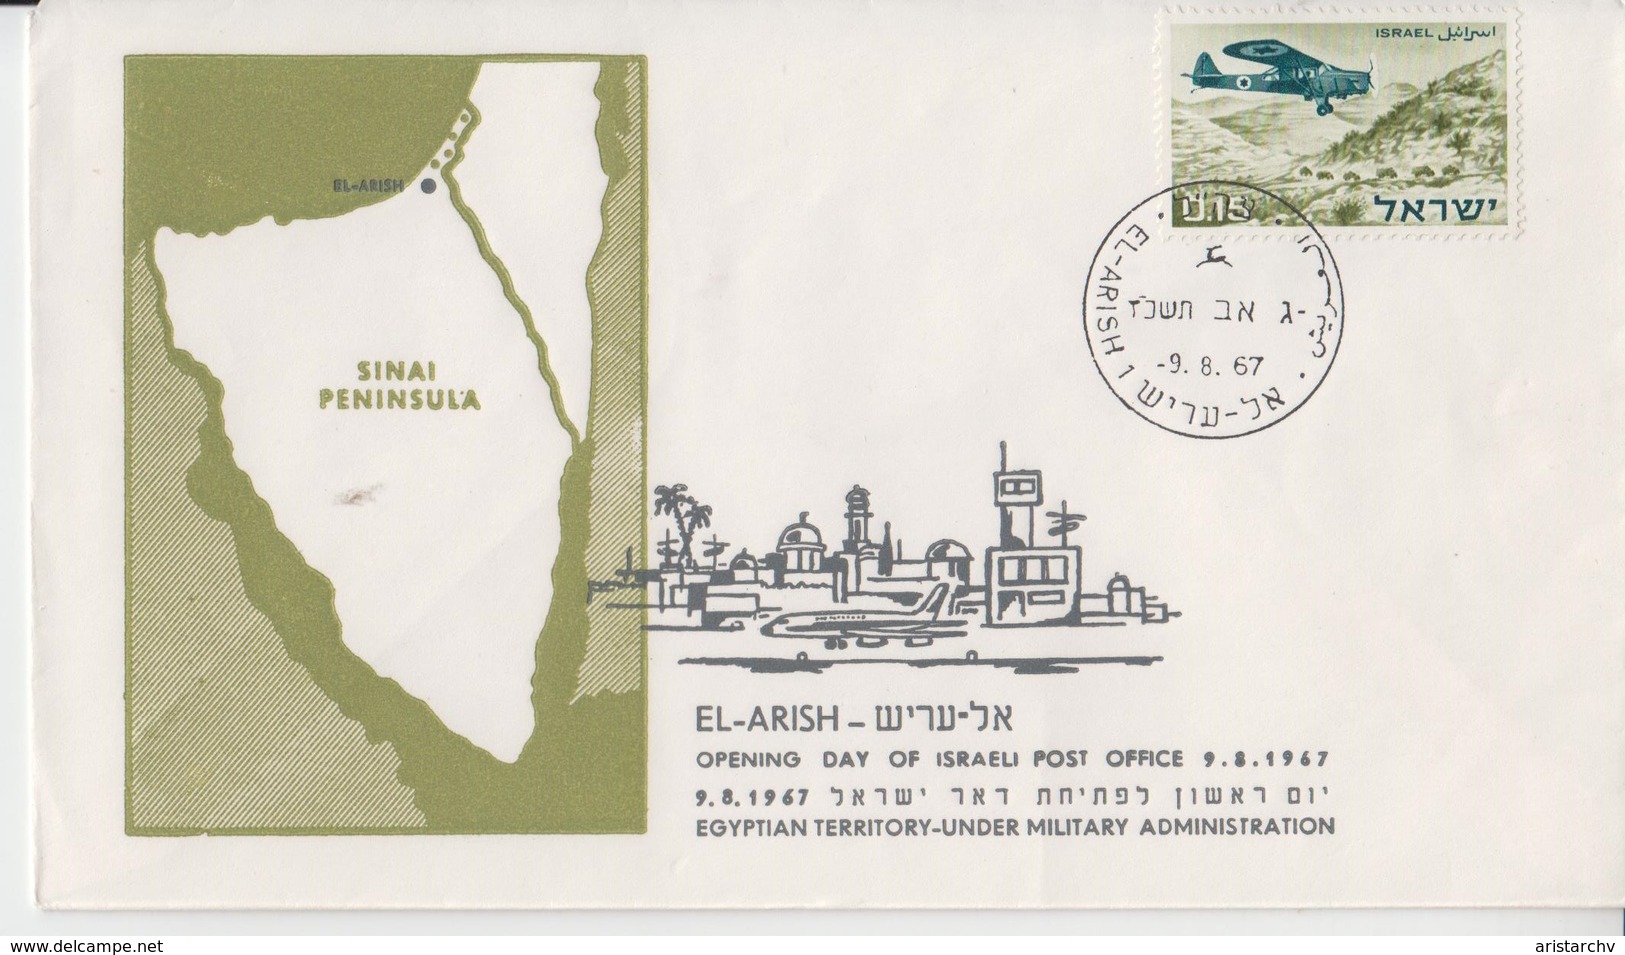 ISRAEL 1967 EL ARISH SINAI PENINSULA OPENING DAY POST OFFICE EGYPTIAN TERRITORY MILITARY ADMINISTRATION TZAHAL IDF COVER - Timbres-taxe